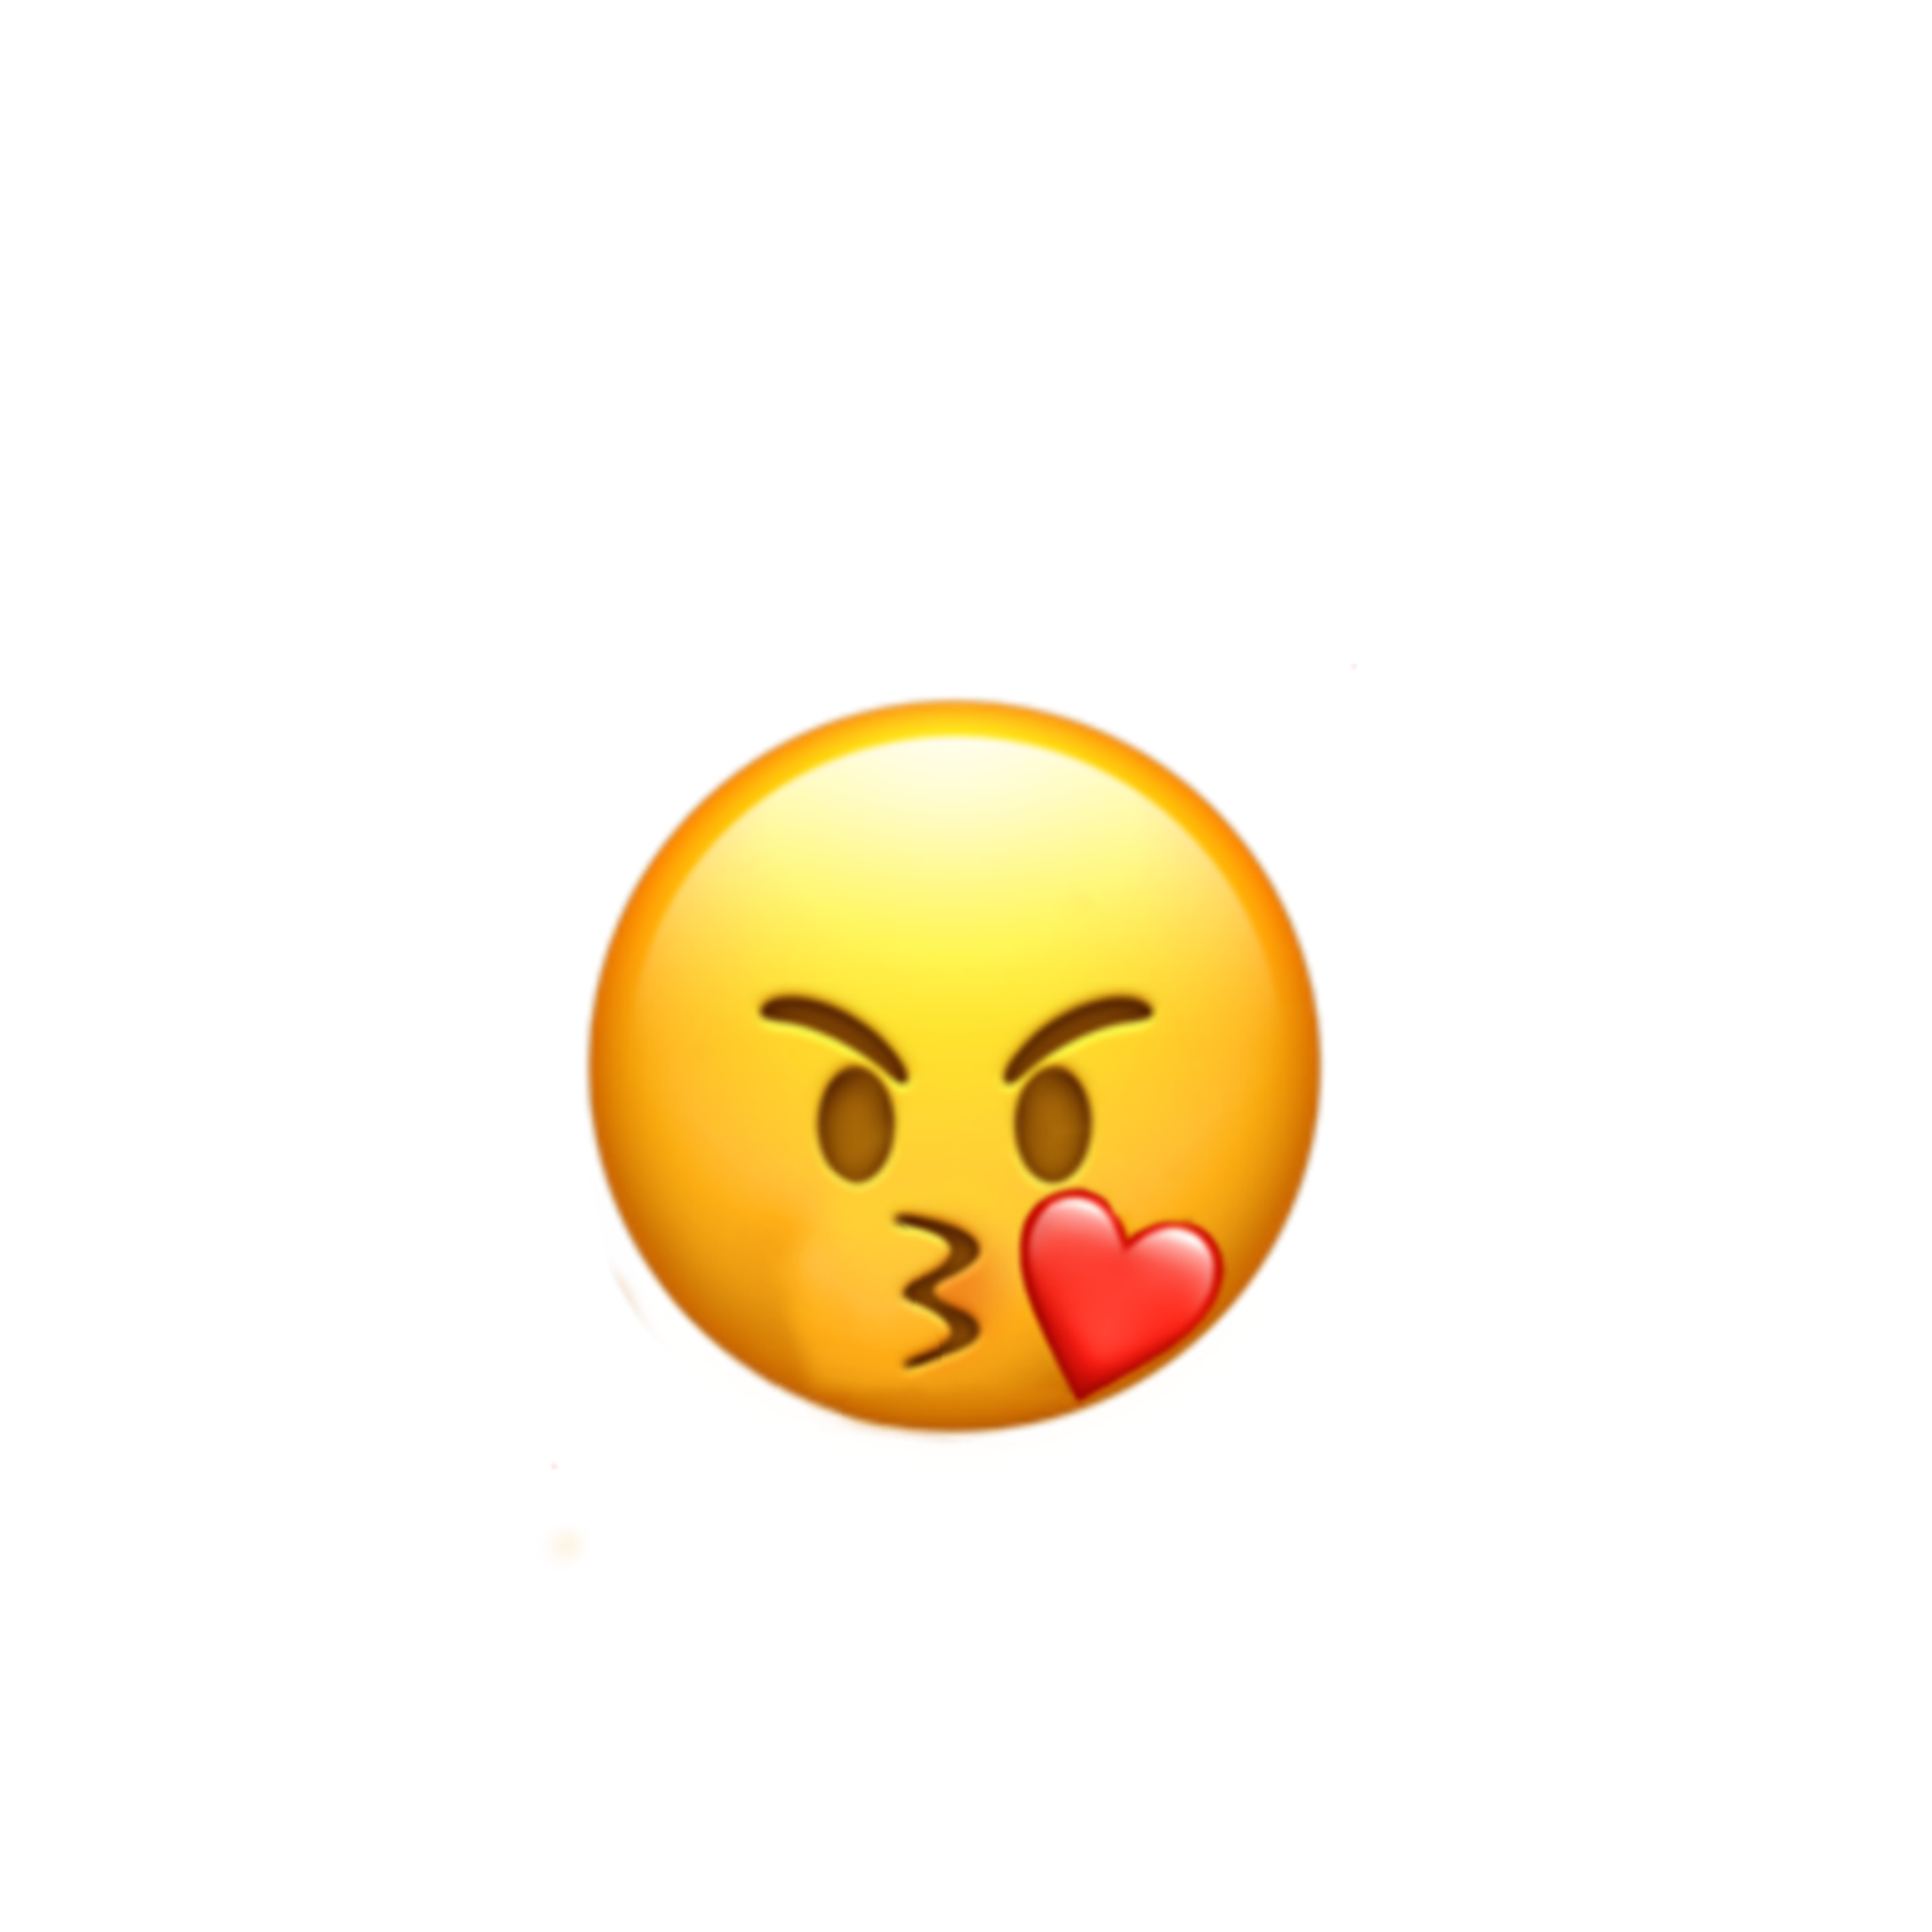 smiley emoji iphone angry kiss 311928189044211 by @marion457.